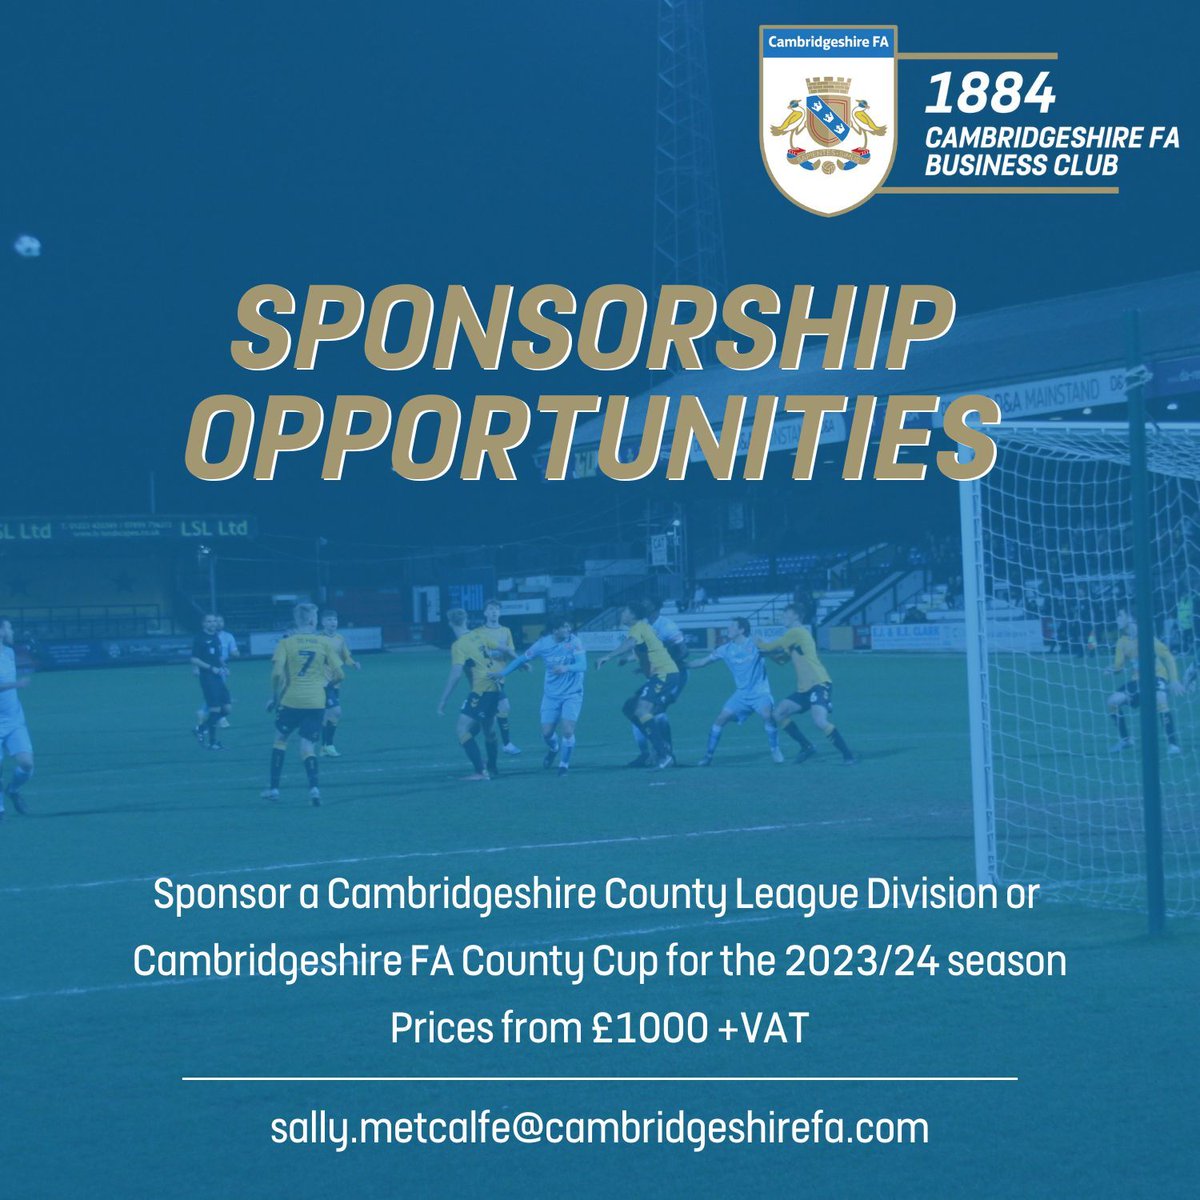 Want to increase your business’s exposure and support grassroots football? ⚽ Sponsor a Cambridgeshire County League Division or County Cup for 2023/24! You'll also get the chance to buy England and FA Cup Final tickets! 🎟️ 📥 Sally.Metcalfe@CambridgeshireFA.com for details.